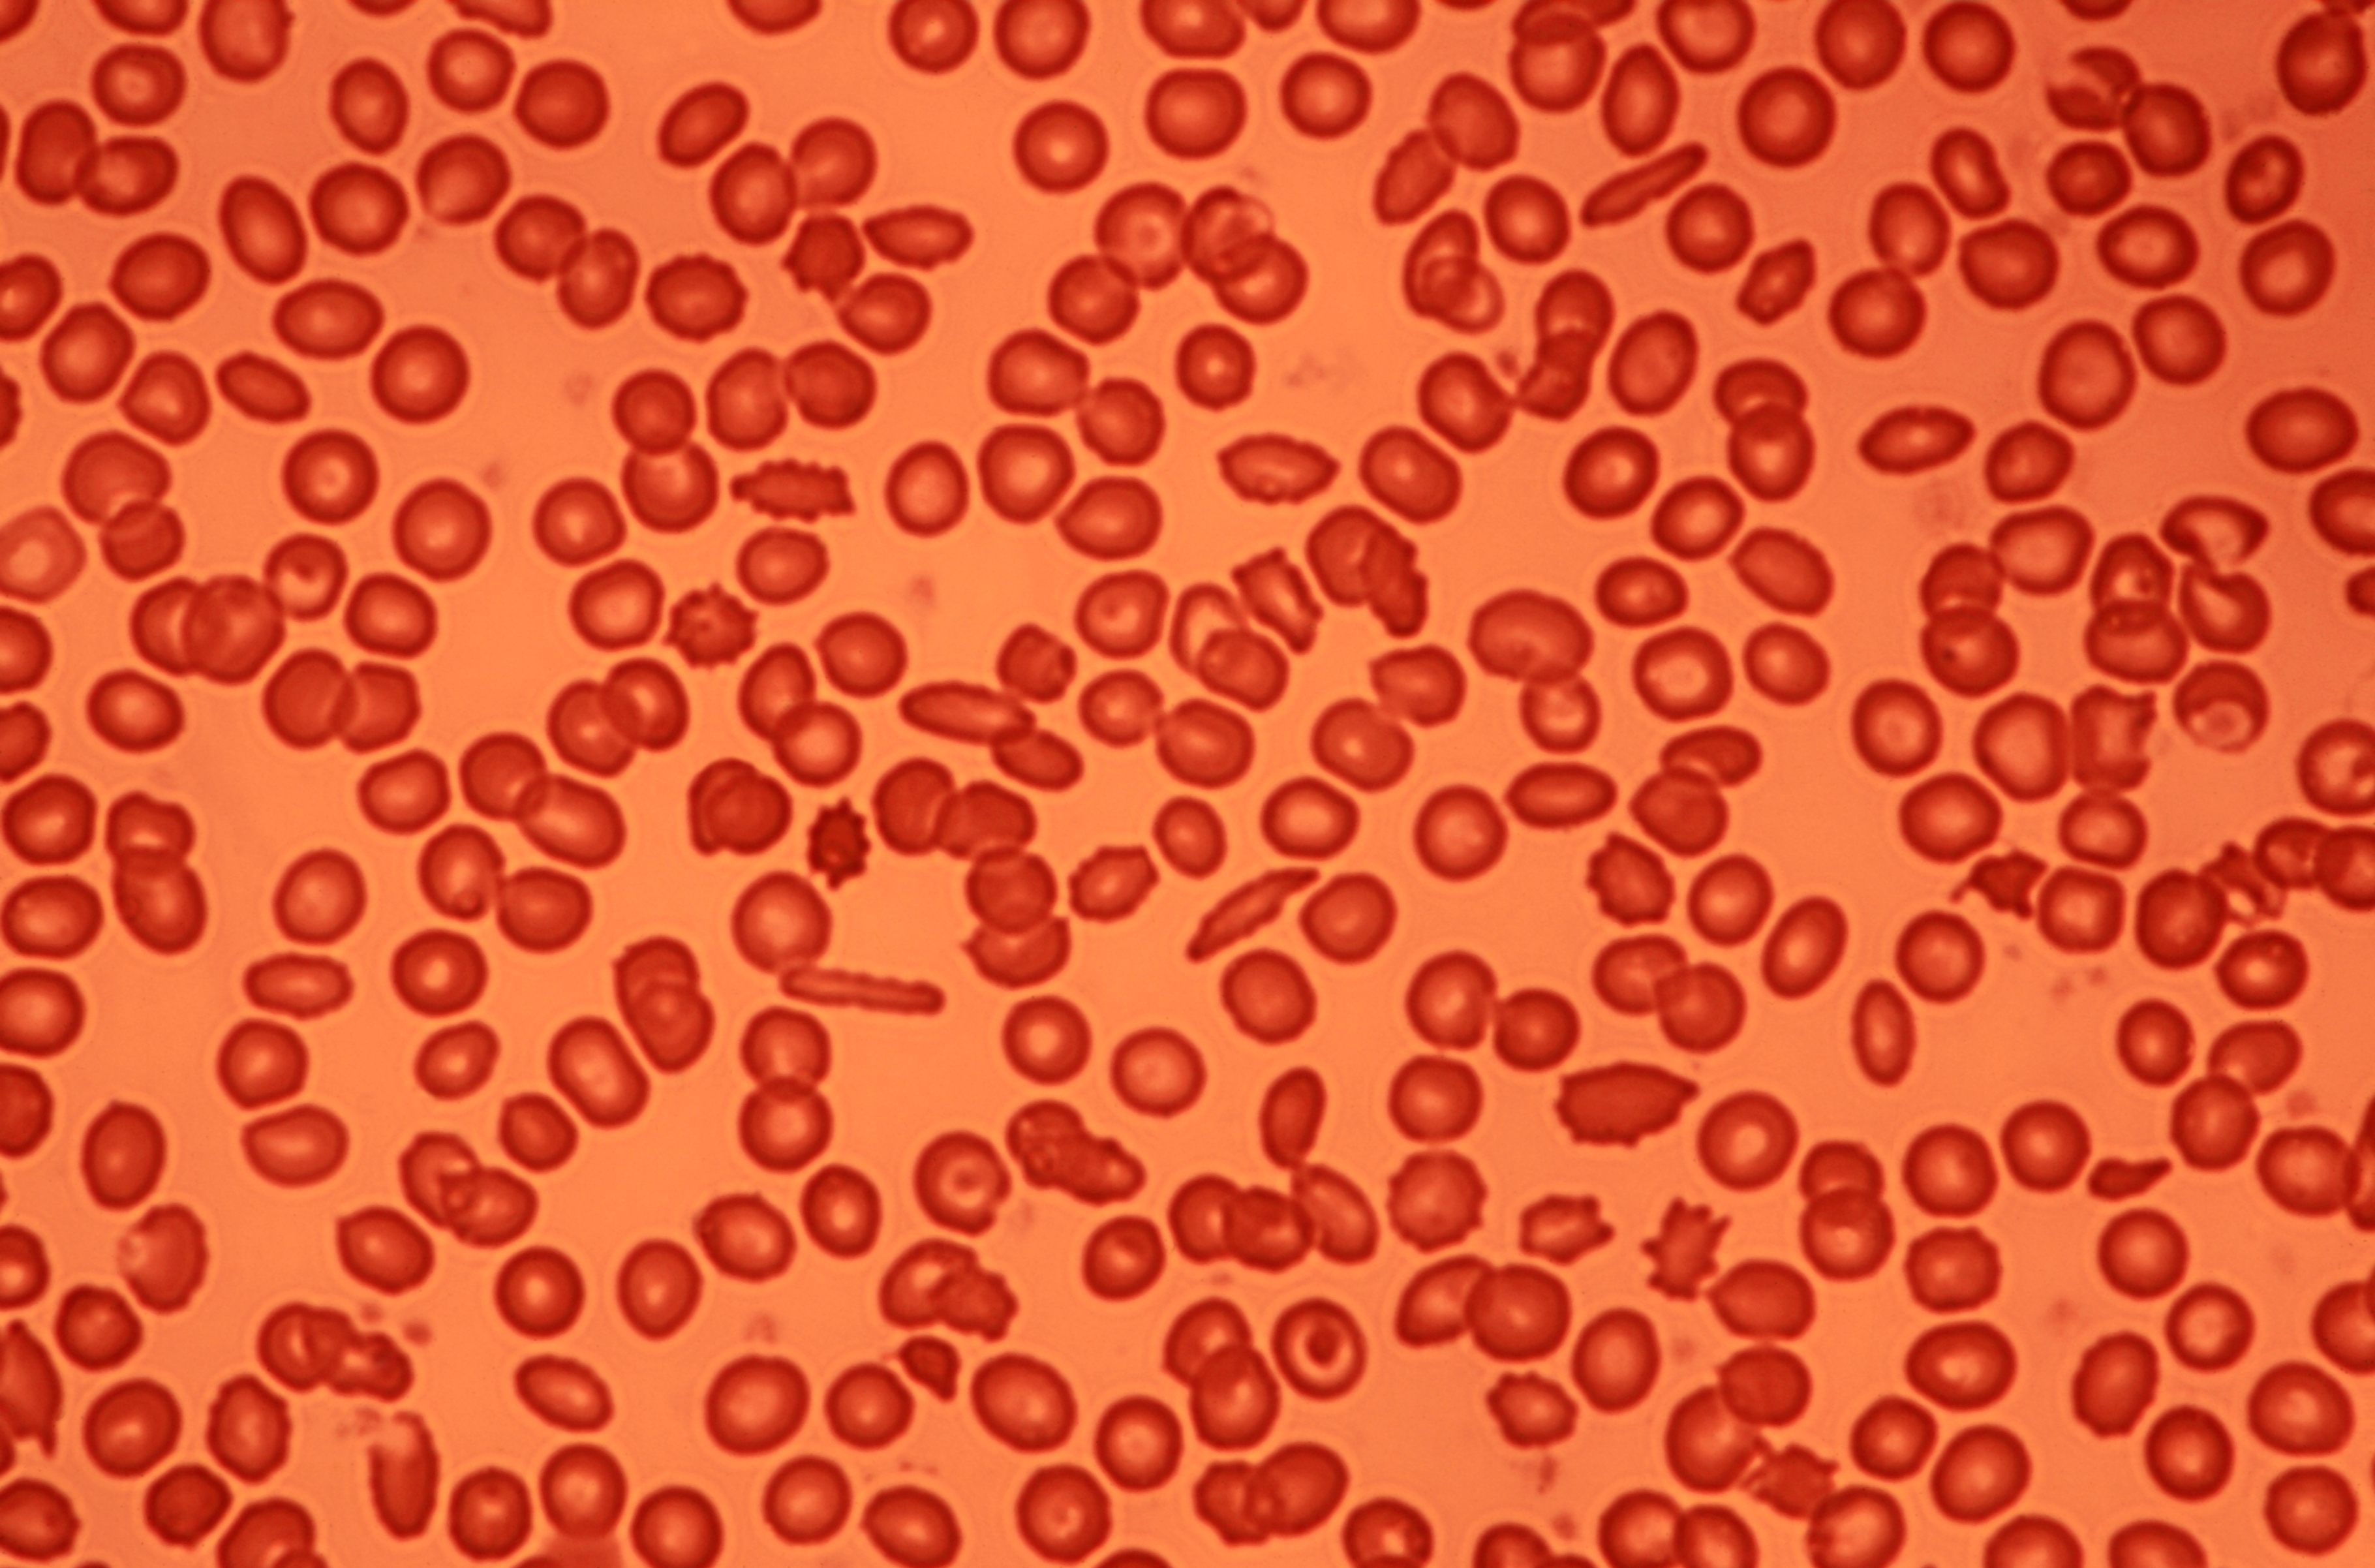 Microscope image of human blood cells.